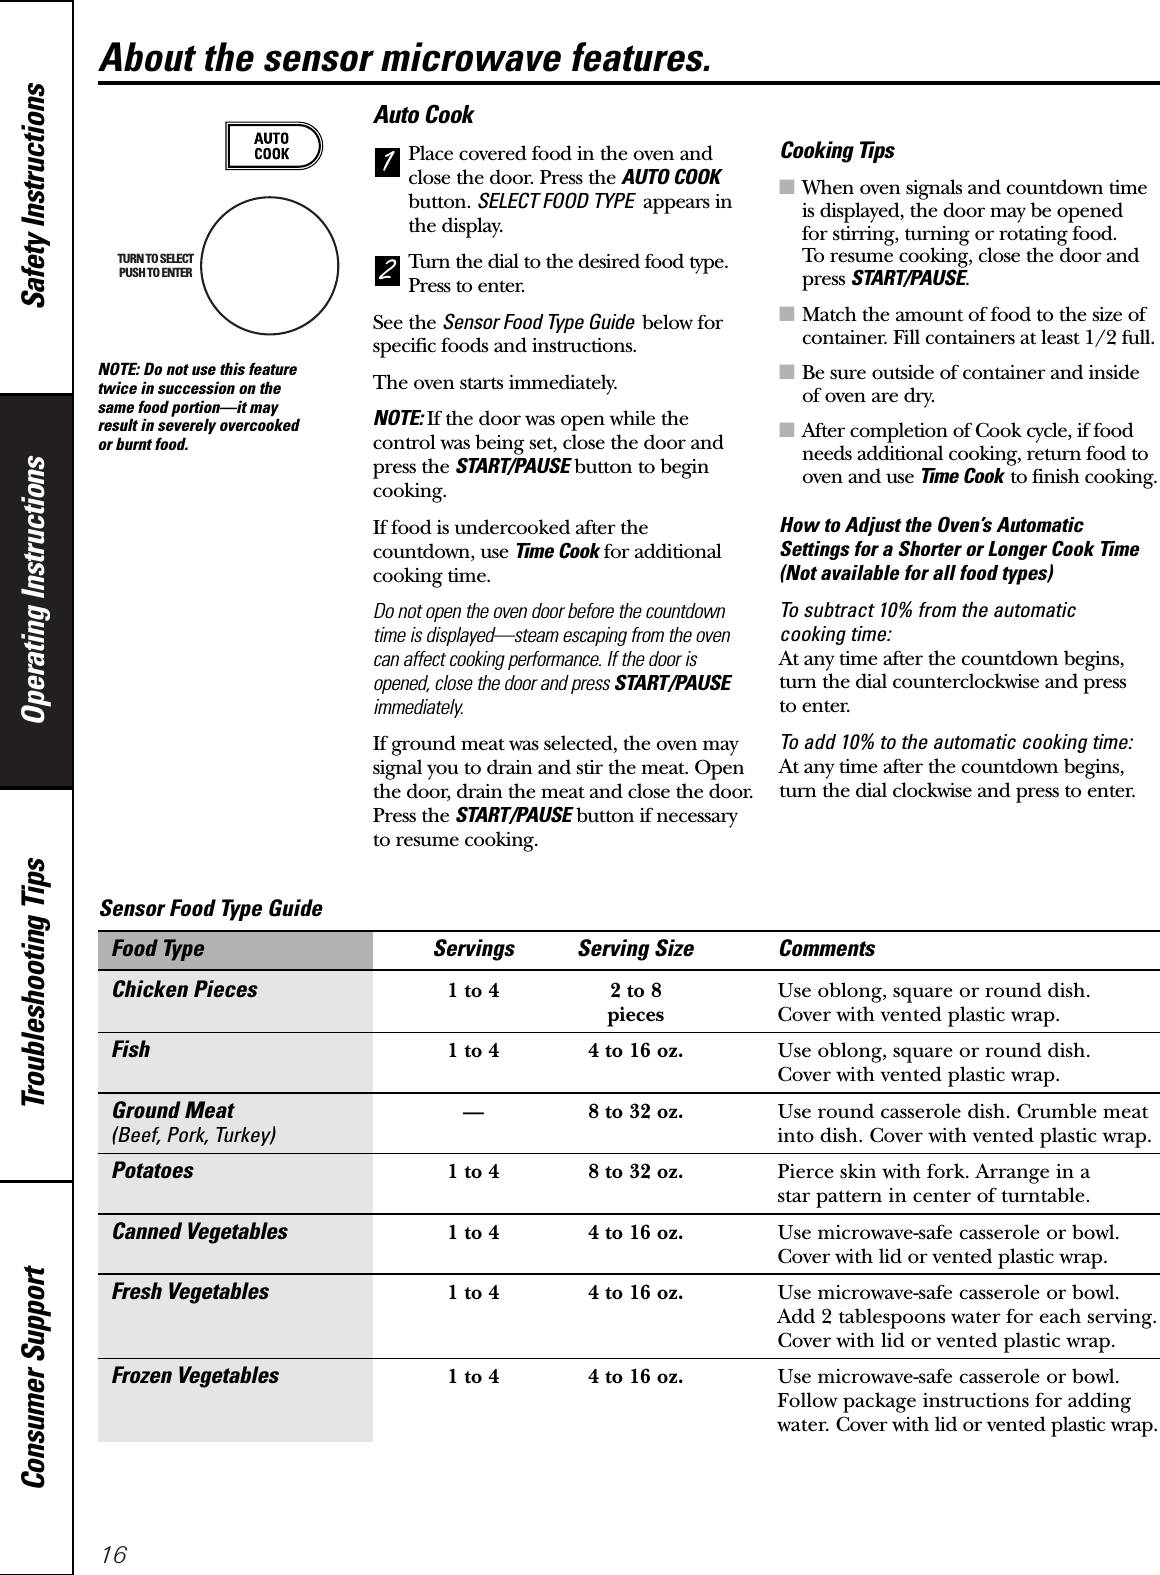 16Operating Instructions Safety InstructionsConsumer Support Troubleshooting TipsPUSH TO ENTERTURN TO SELECTSensor Food Type GuideFood Type Servings Serving Size CommentsChicken Pieces 1 to 4 2 to 8 Use oblong, square or round dish. pieces Cover with vented plastic wrap.Fish 1 to 4 4 to 16 oz. Use oblong, square or round dish. Cover with vented plastic wrap.Ground Meat — 8 to 32 oz. Use round casserole dish. Crumble meat (Beef, Pork, Turkey) into dish. Cover with vented plastic wrap.Potatoes 1 to 4 8 to 32 oz. Pierce skin with fork. Arrange in a star pattern in center of turntable.Canned Vegetables 1 to 4 4 to 16 oz. Use microwave-safe casserole or bowl.Cover with lid or vented plastic wrap.Fresh Vegetables 1 to 4 4 to 16 oz. Use microwave-safe casserole or bowl. Add 2 tablespoons water for each serving. Cover with lid or vented plastic wrap.Frozen Vegetables 1 to 4 4 to 16 oz. Use microwave-safe casserole or bowl. Follow package instructions for adding water. Cover with lid or vented plastic wrap.Auto CookPlace covered food in the oven andclose the door. Press the AUTO COOKbutton. SELECT FOOD TYPE appears inthe display.Turn the dial to the desired food type.Press to enter.See the Sensor Food Type Guide below forspecific foods and instructions.The oven starts immediately.NOTE: If the door was open while thecontrol was being set, close the door andpress the START/PAUSE button to begincooking.If food is undercooked after thecountdown, use Time Cook for additionalcooking time.Do not open the oven door before the countdowntime is displayed—steam escaping from the ovencan affect cooking performance. If the door isopened, close the door and press START/PAUSEimmediately.If ground meat was selected, the oven maysignal you to drain and stir the meat. Openthe door, drain the meat and close the door.Press the START/PAUSE button if necessaryto resume cooking.Cooking Tips■When oven signals and countdown timeis displayed, the door may be opened for stirring, turning or rotating food. To resume cooking, close the door andpress START/PAUSE.■Match the amount of food to the size ofcontainer. Fill containers at least 1/2 full.■Be sure outside of container and insideof oven are dry.■After completion of Cook cycle, if foodneeds additional cooking, return food tooven and use Time Cook to finish cooking.How to Adjust the Oven’s Automatic Settings for a Shorter or Longer Cook Time(Not available for all food types)To subtract 10% from the automatic cooking time: At any time after the countdown begins,turn the dial counterclockwise and press to enter. To add 10% to the automatic cooking time:At any time after the countdown begins,turn the dial clockwise and press to enter. 21About the sensor microwave features.NOTE: Do not use this featuretwice in succession on thesame food portion—it mayresult in severely overcookedor burnt food.